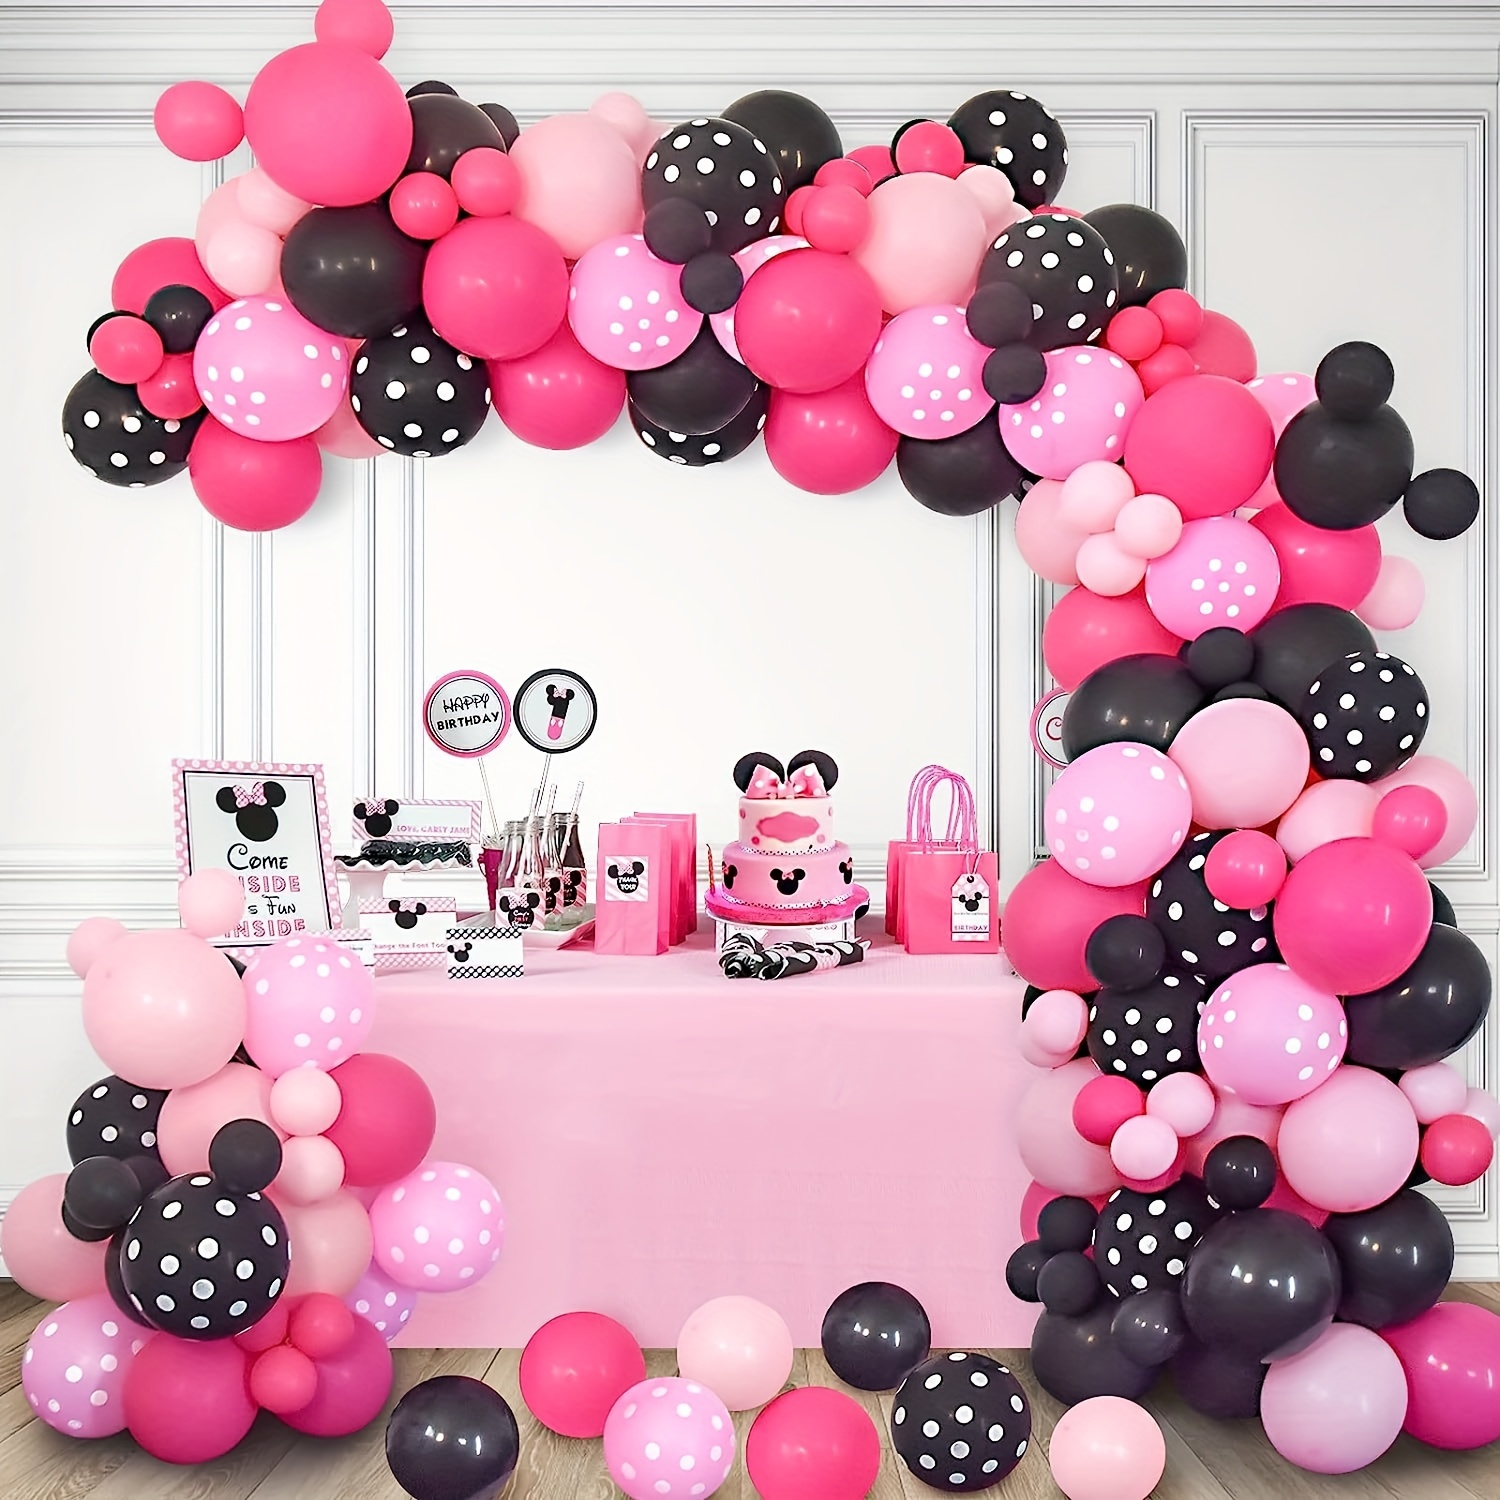 1Set Pink Mouse Birthday Decorations, Pink Mouse Balloon Arch Garland Kit  with Pink Bow Tie, Pink Hot Pink Polka Dots for Girls Mouse Theme Birthday  Party Decorations Baby shower Wedding Party Supplies